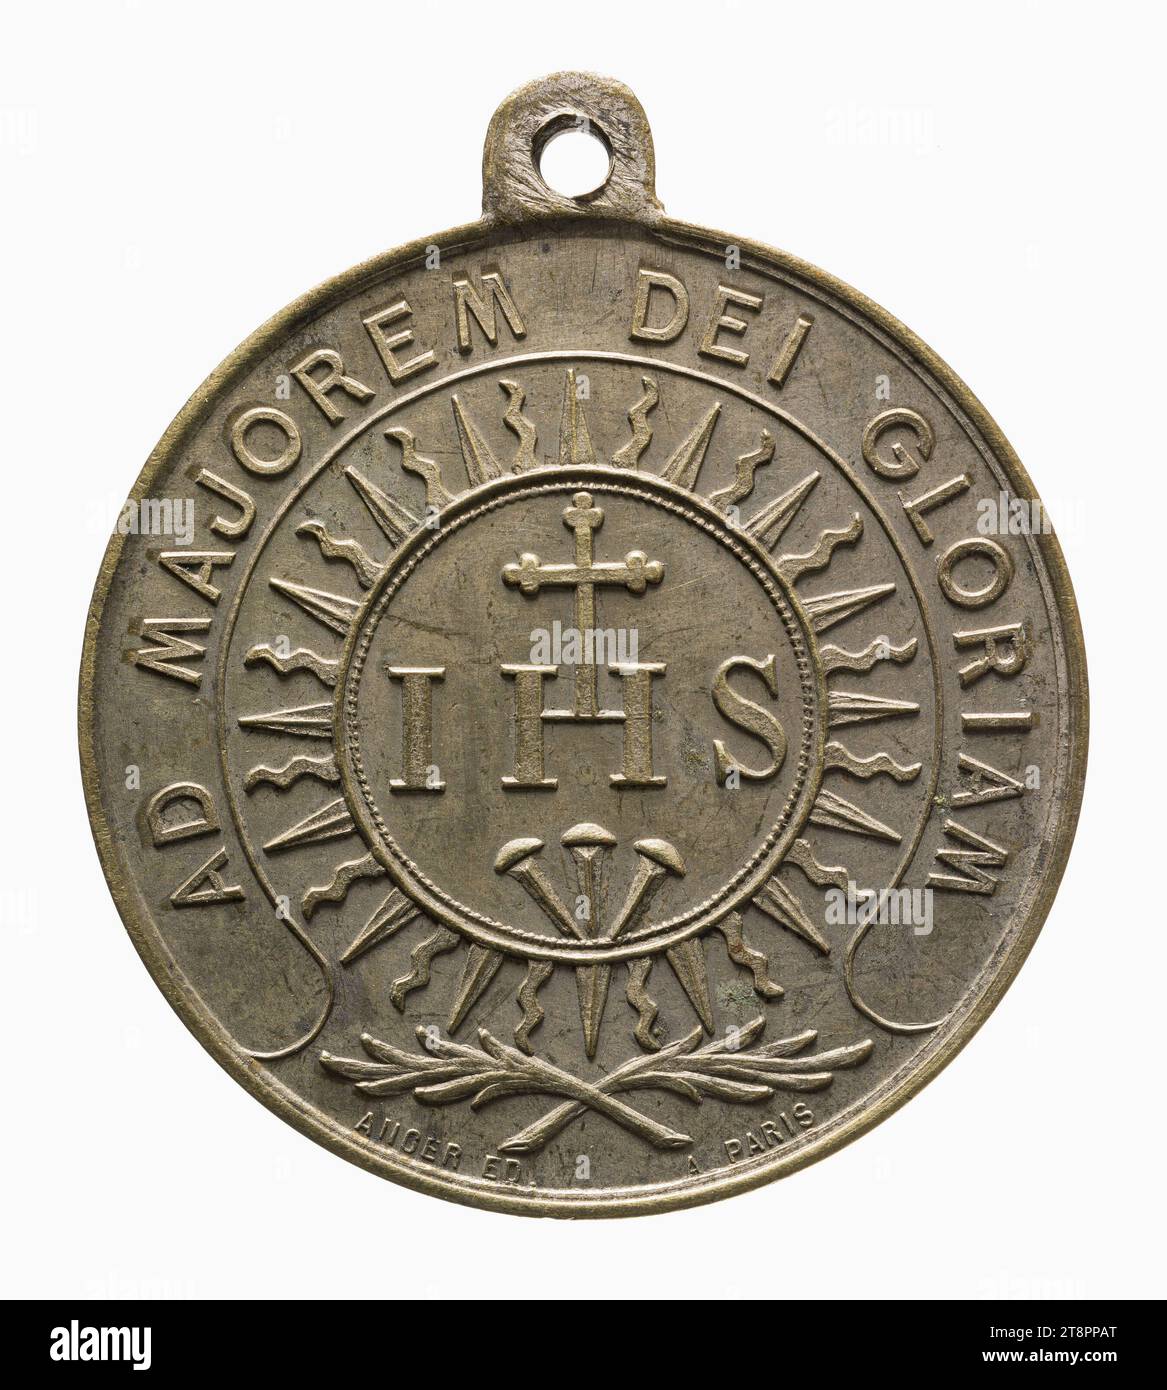 Members of the Society of Jesus shot by the Paris Commune, May 24-26, 1871, Anger (Monsieur), Editor, In 1871, Numismatic, Medal, Copper, Silver plated = silver plating, Dimensions - Work: Diameter: 2.7 cm, Weight (type dimension): 6.7 g Stock Photo